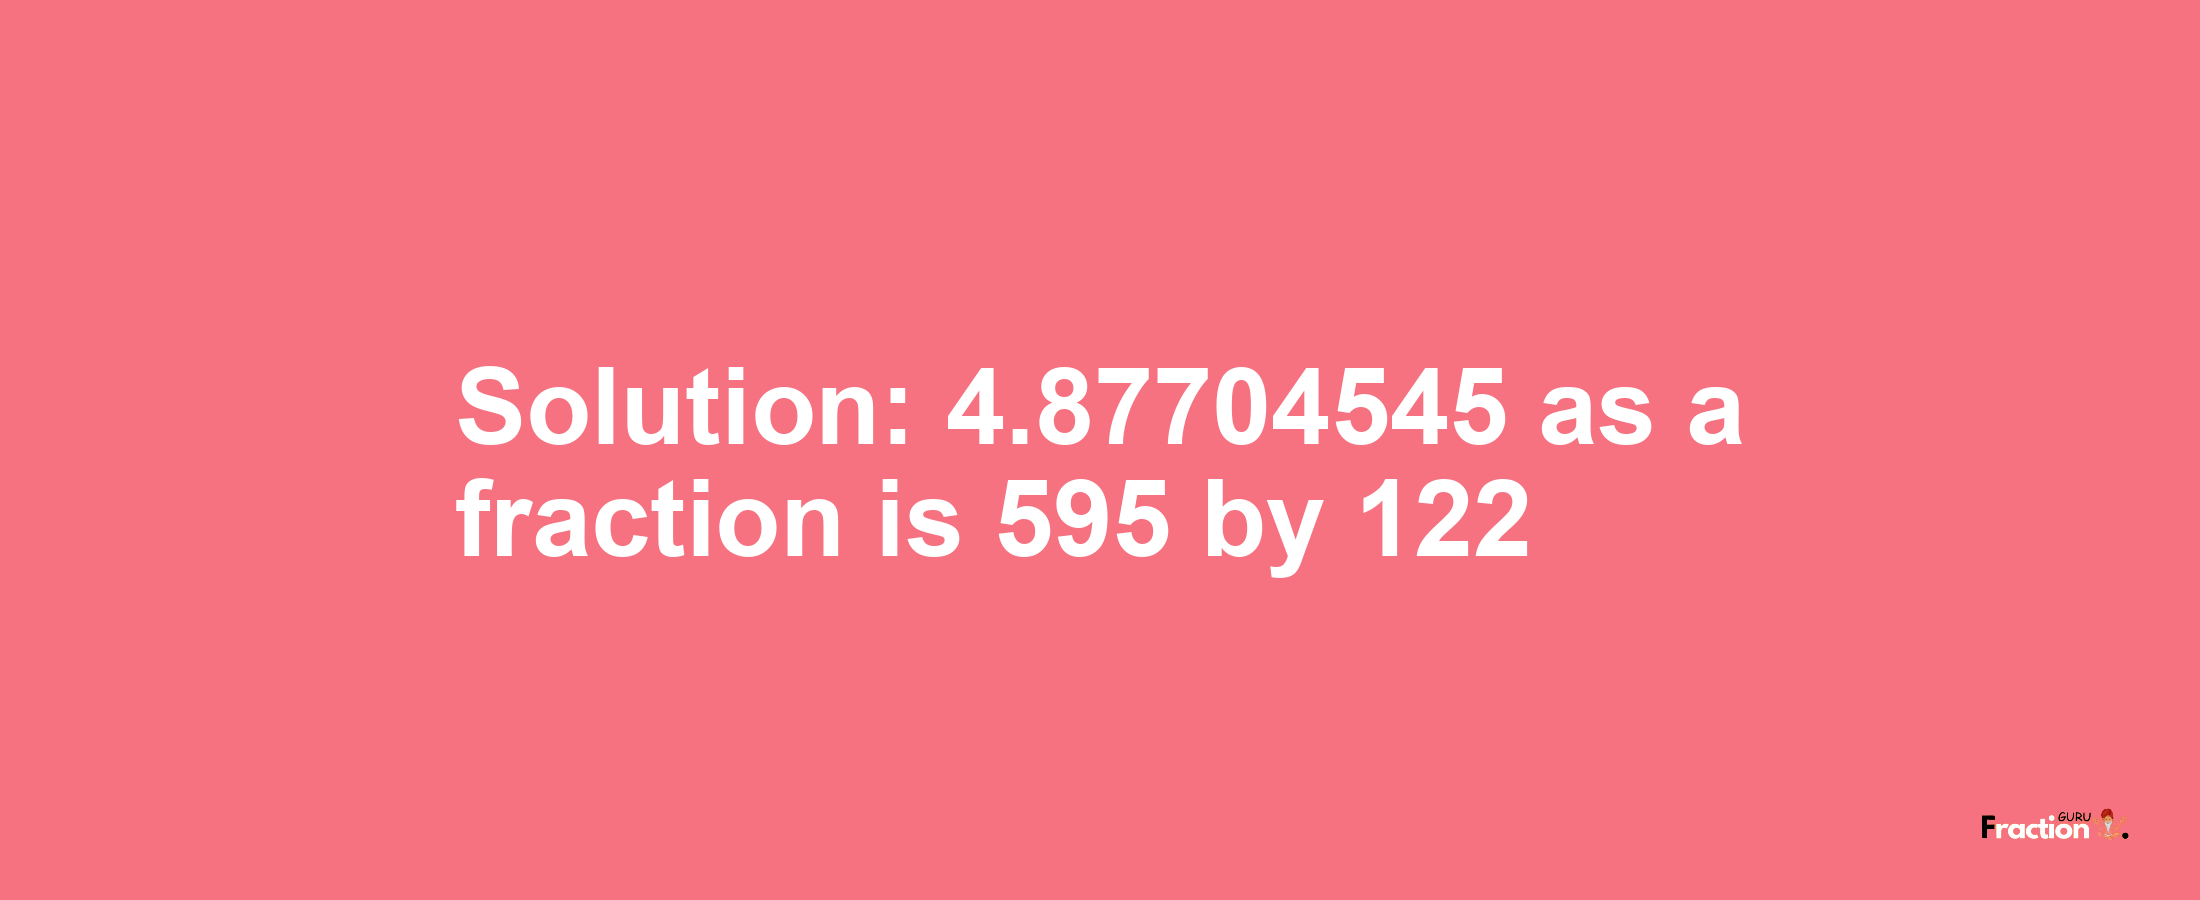 Solution:4.87704545 as a fraction is 595/122